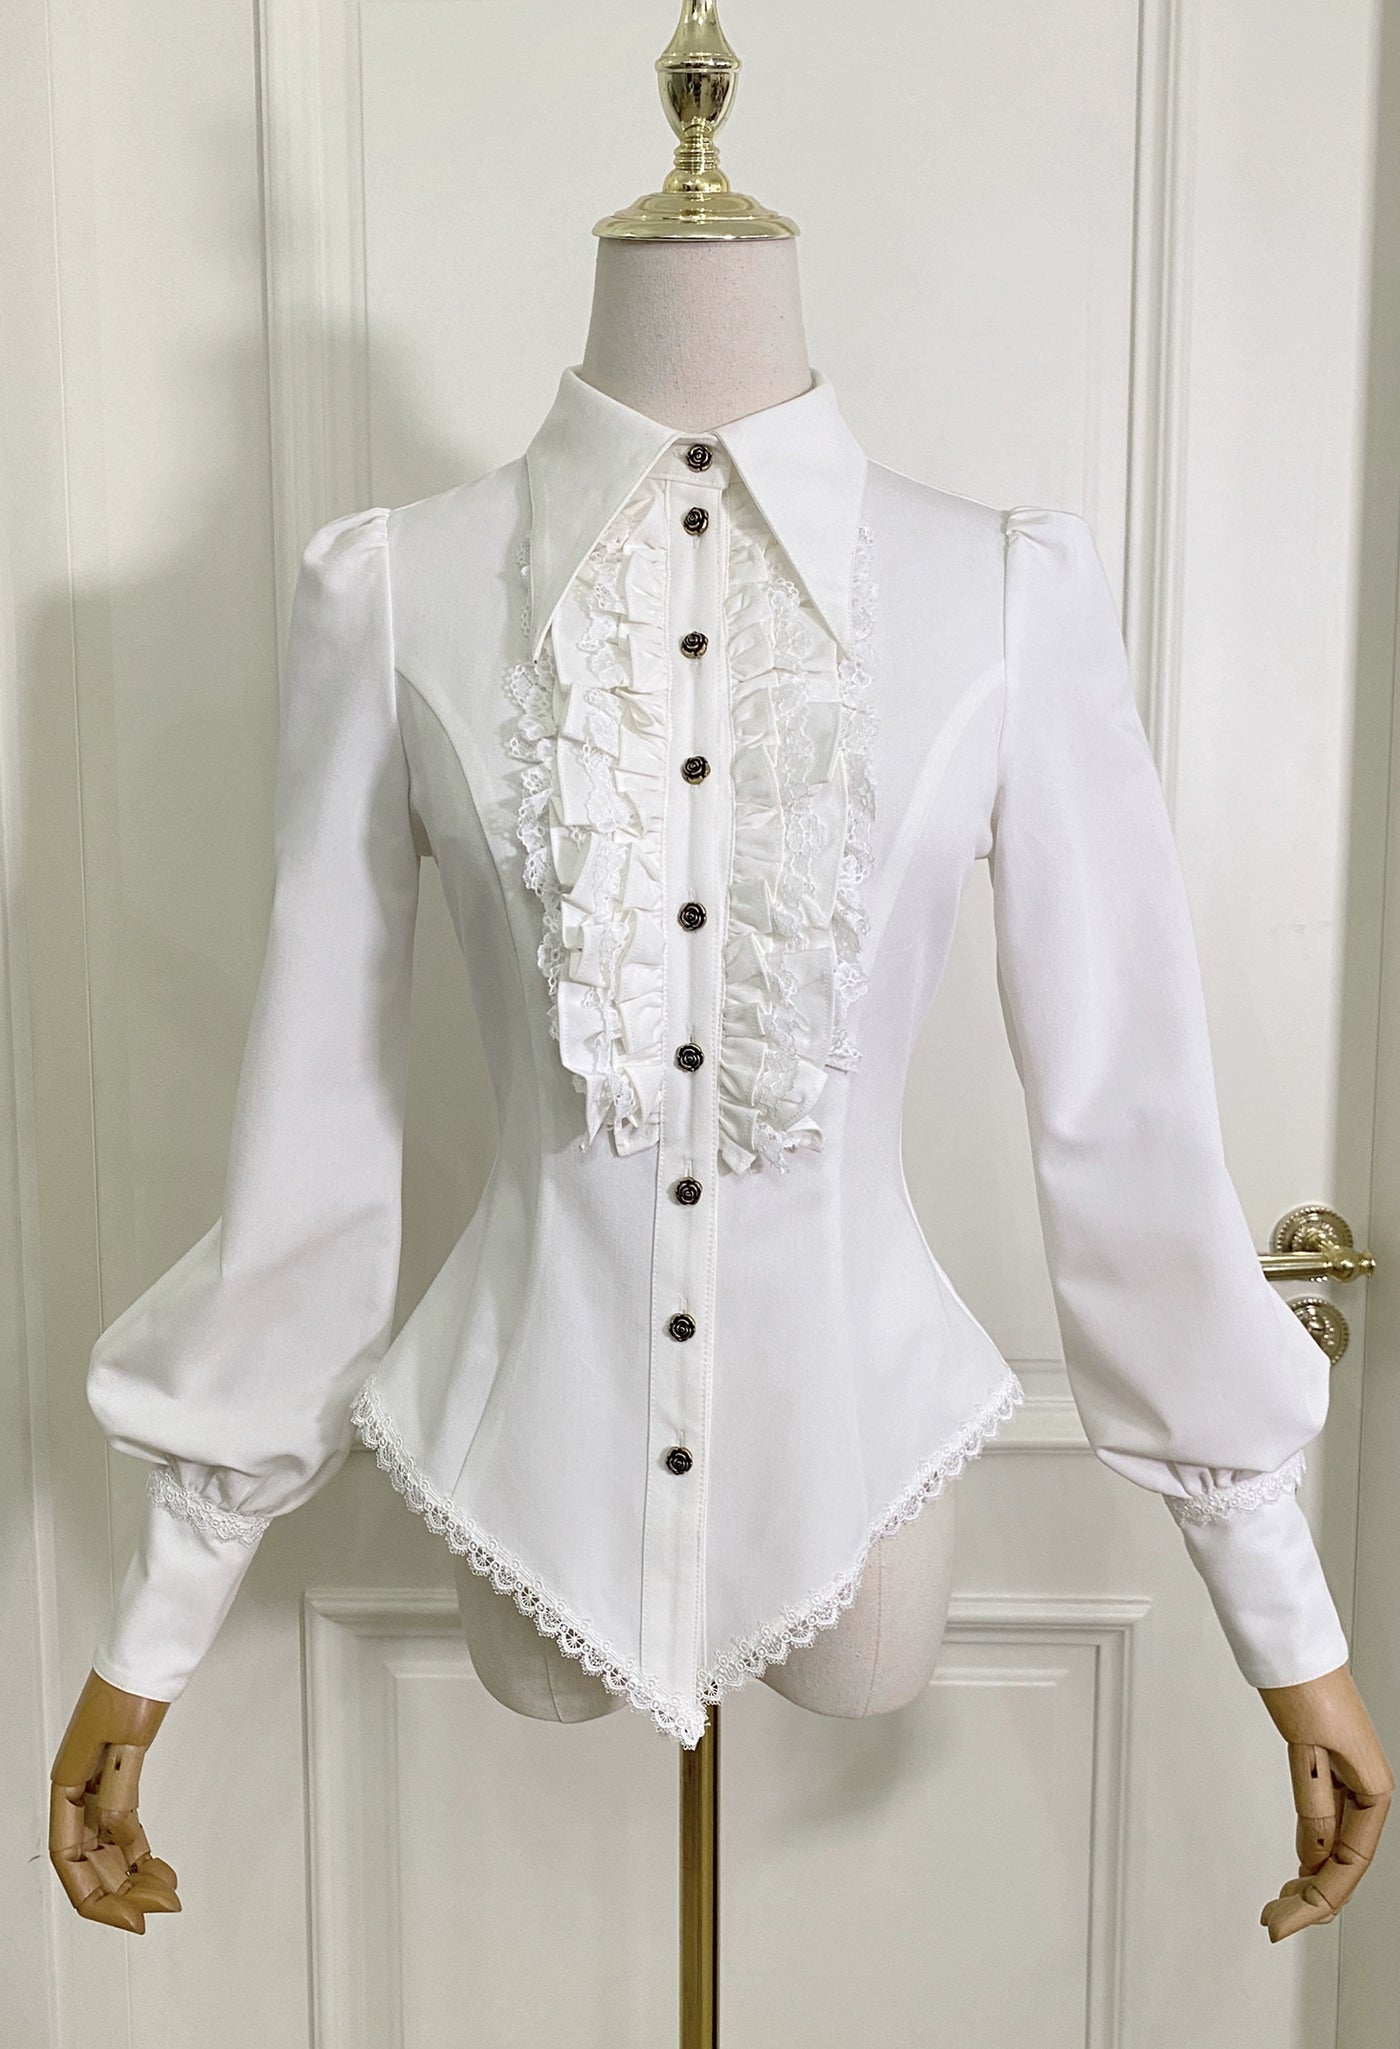 Little Dipper~Gothic Lolita Shirt Long Sleeve Bow Tie Blouse S Off-white shirt with white lace 